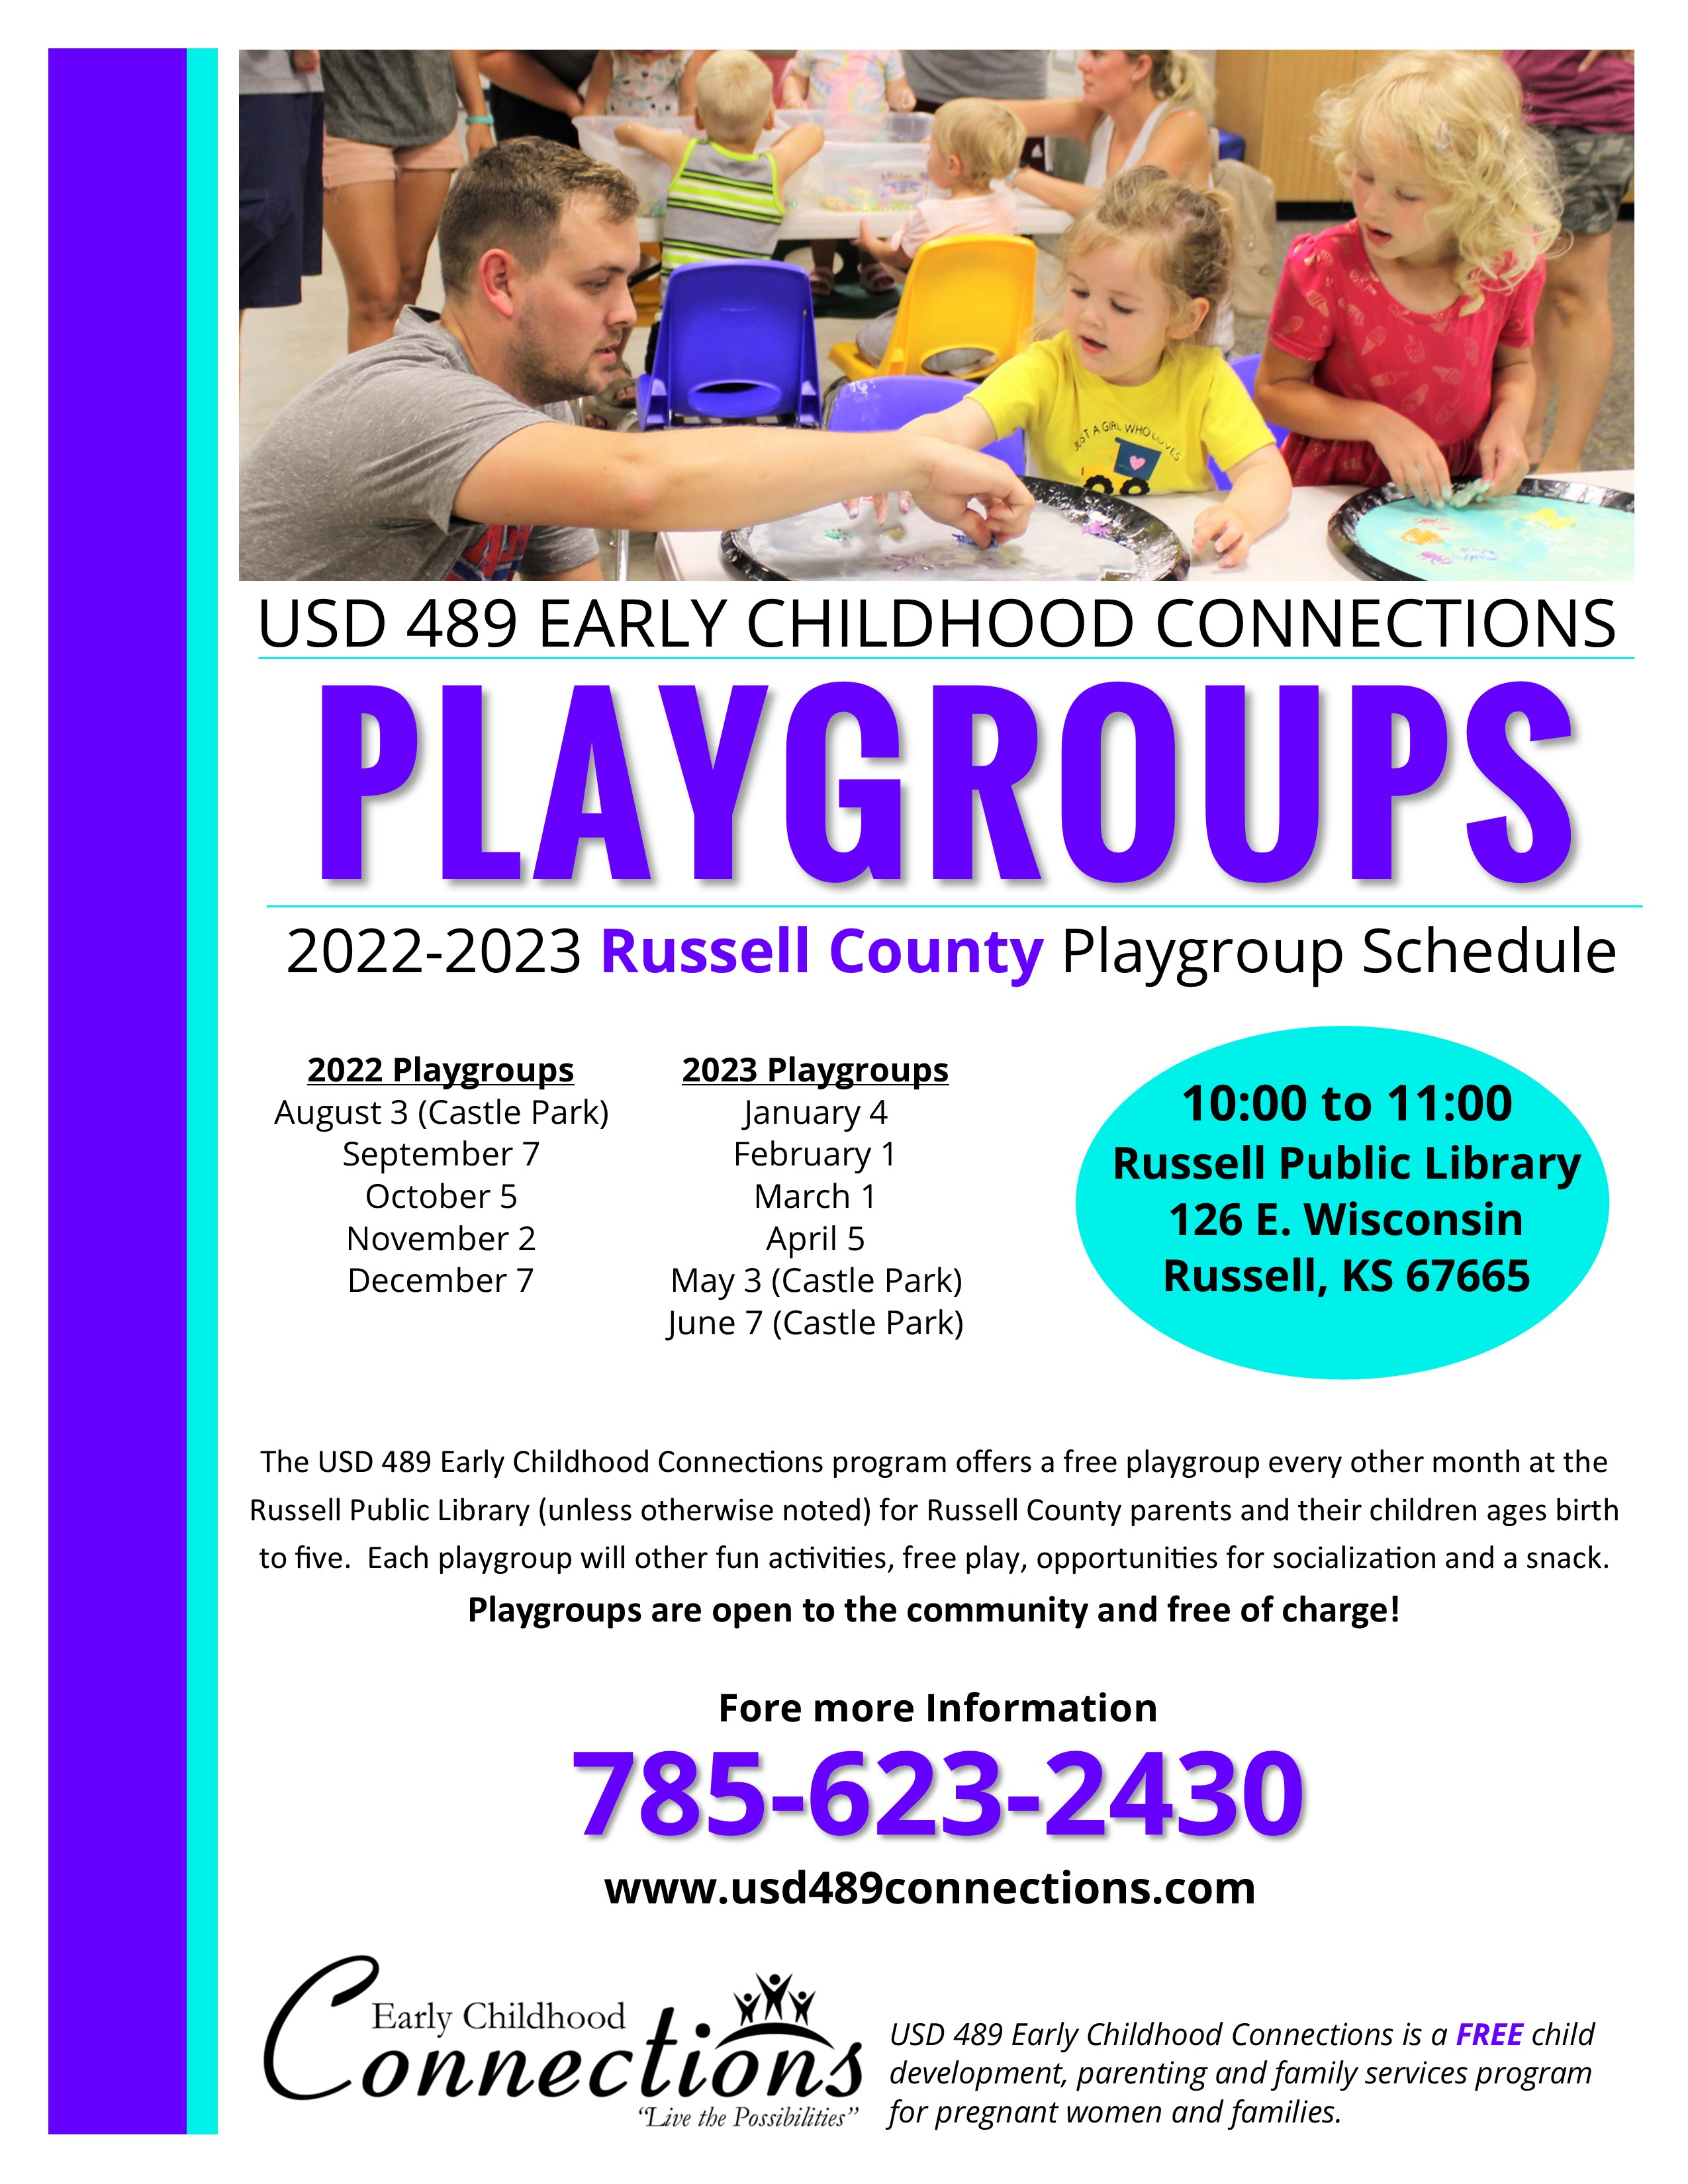 Russell Playgroup Schedule